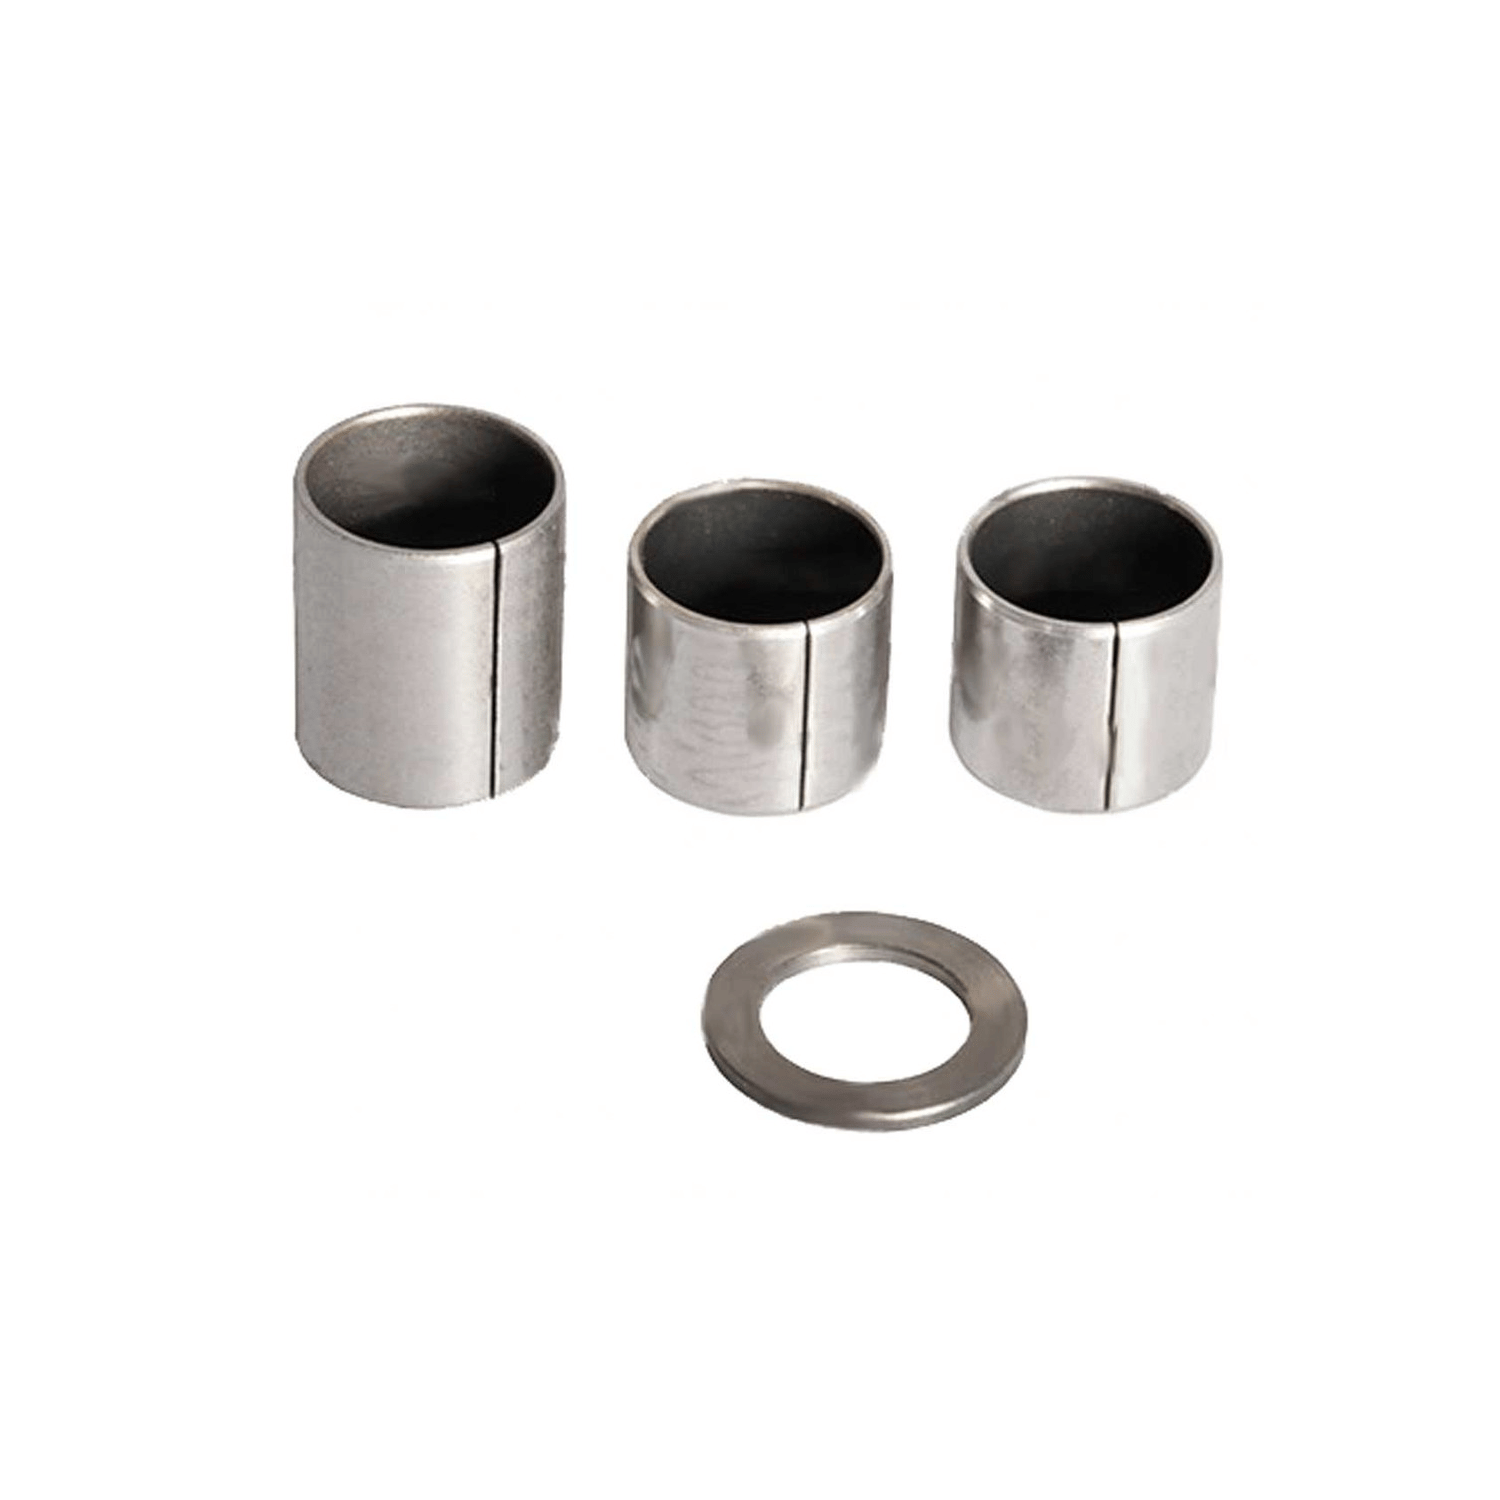 Plain bearing set FRASCOLD, 4CL, V series - not available, replaced by successor